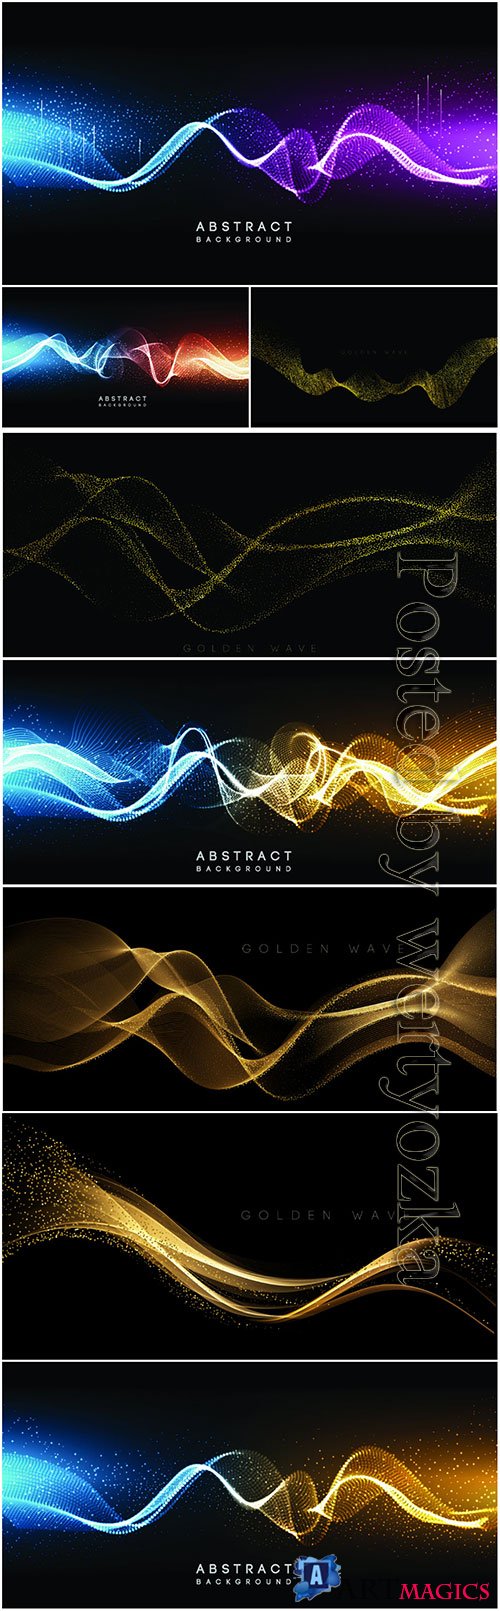 Gold and color waves in vector